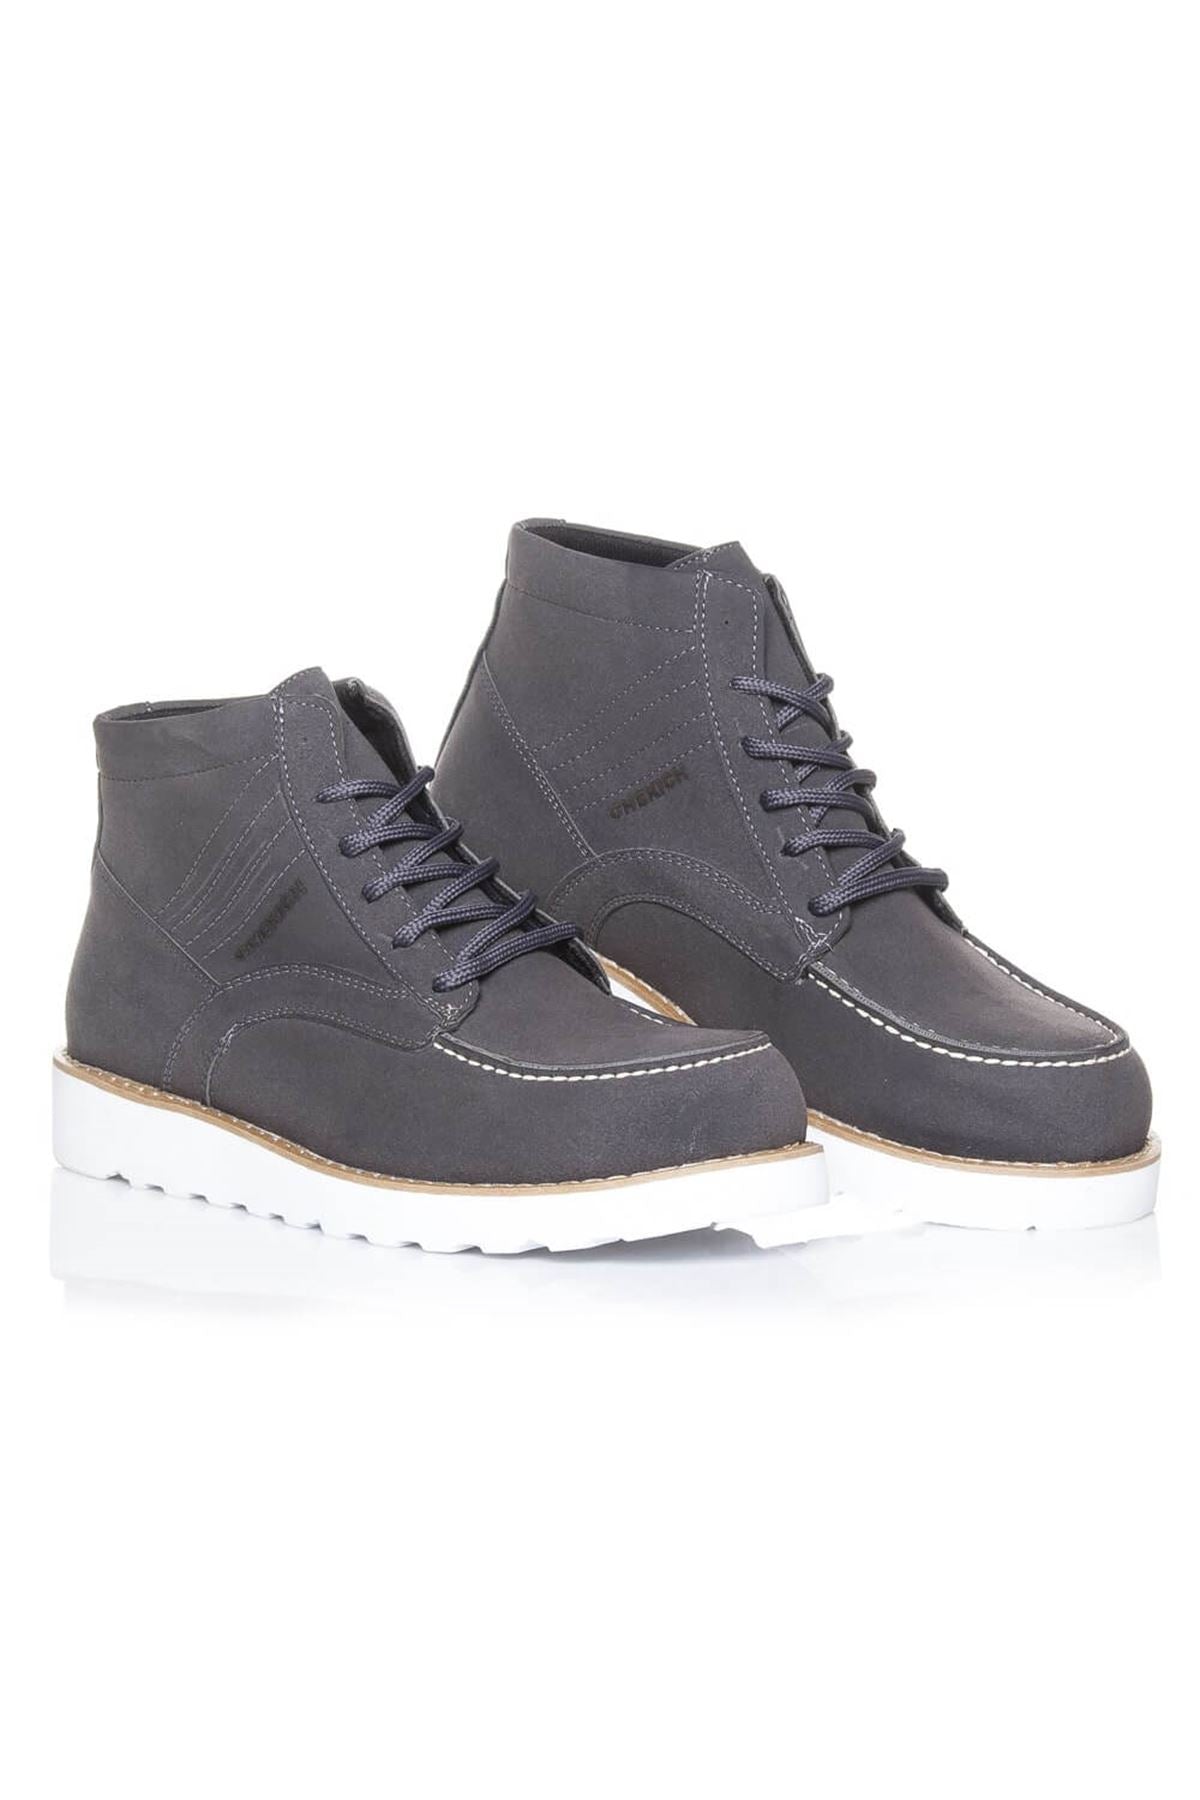 CH047 Suede BT Men's Boots ANTHRACITE - STREETMODE ™